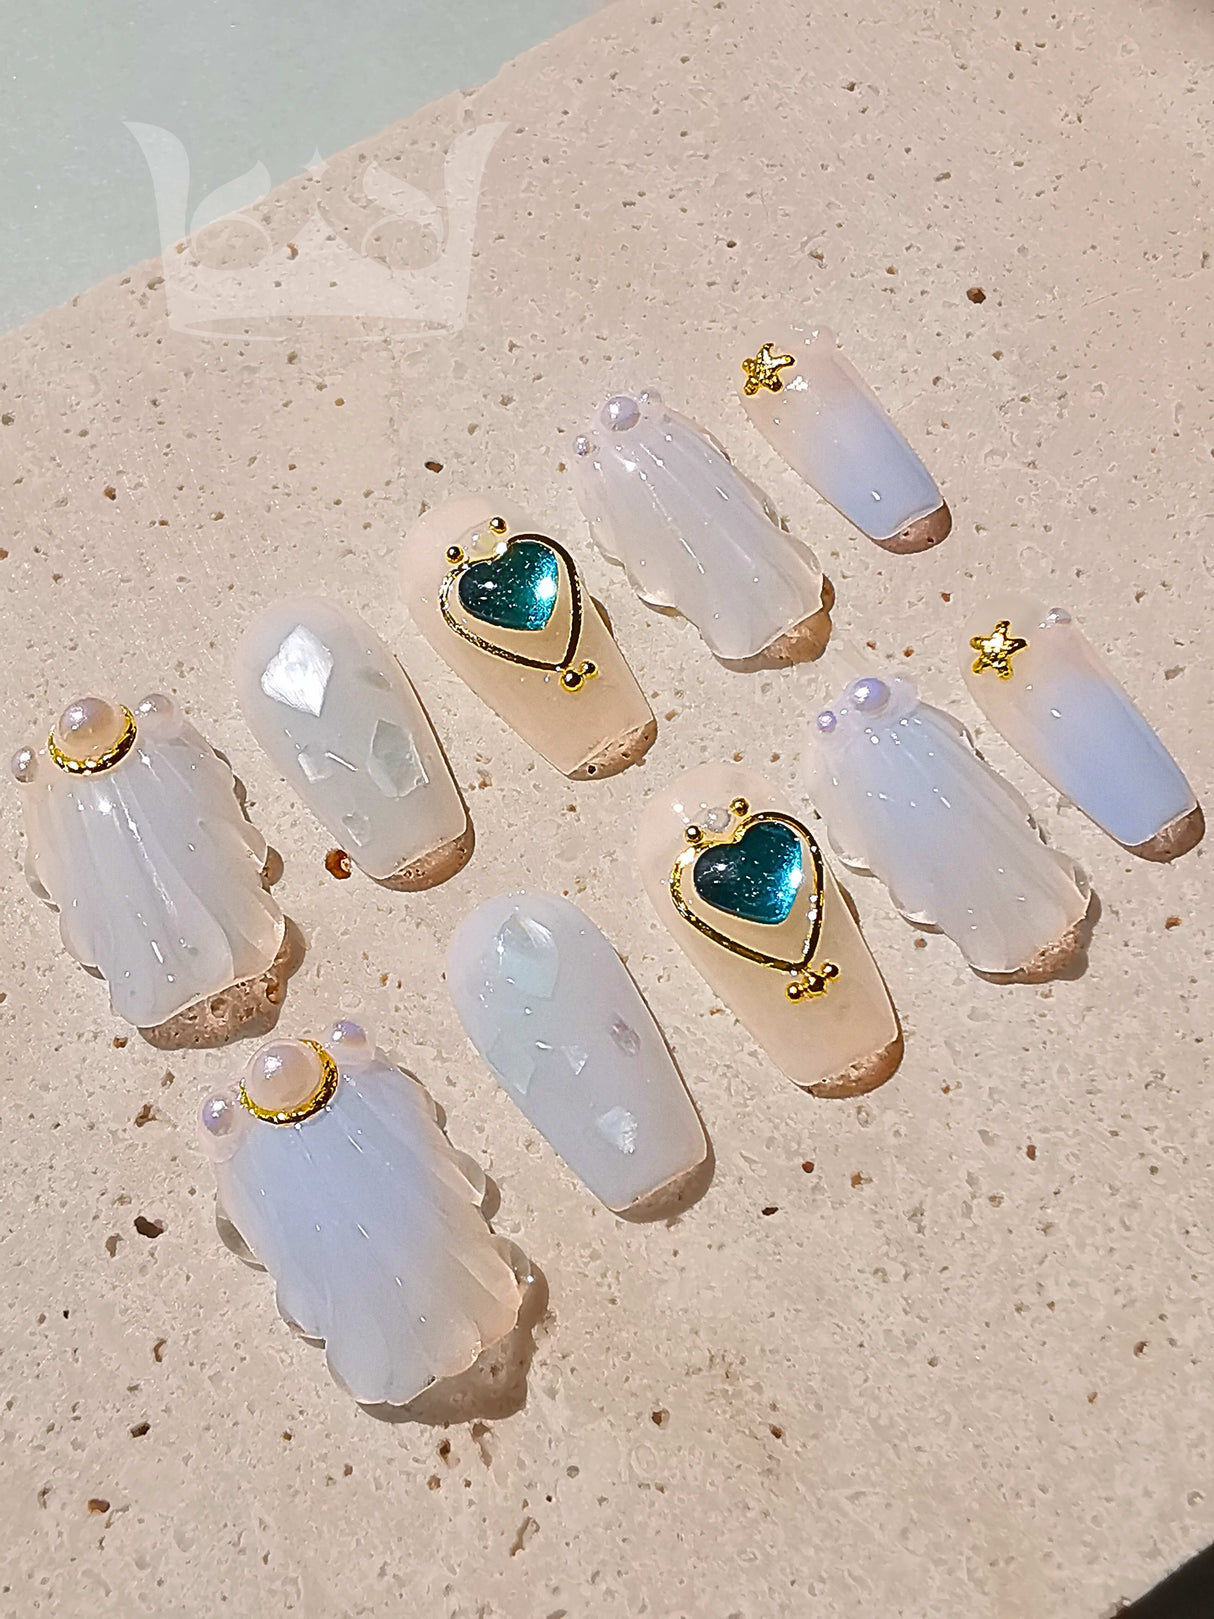 Translucent, milky white acrylic nails with golden accents, stars, and gems for nail art or manicure purposes. Varying sizes and shapes to fit different fingernails.